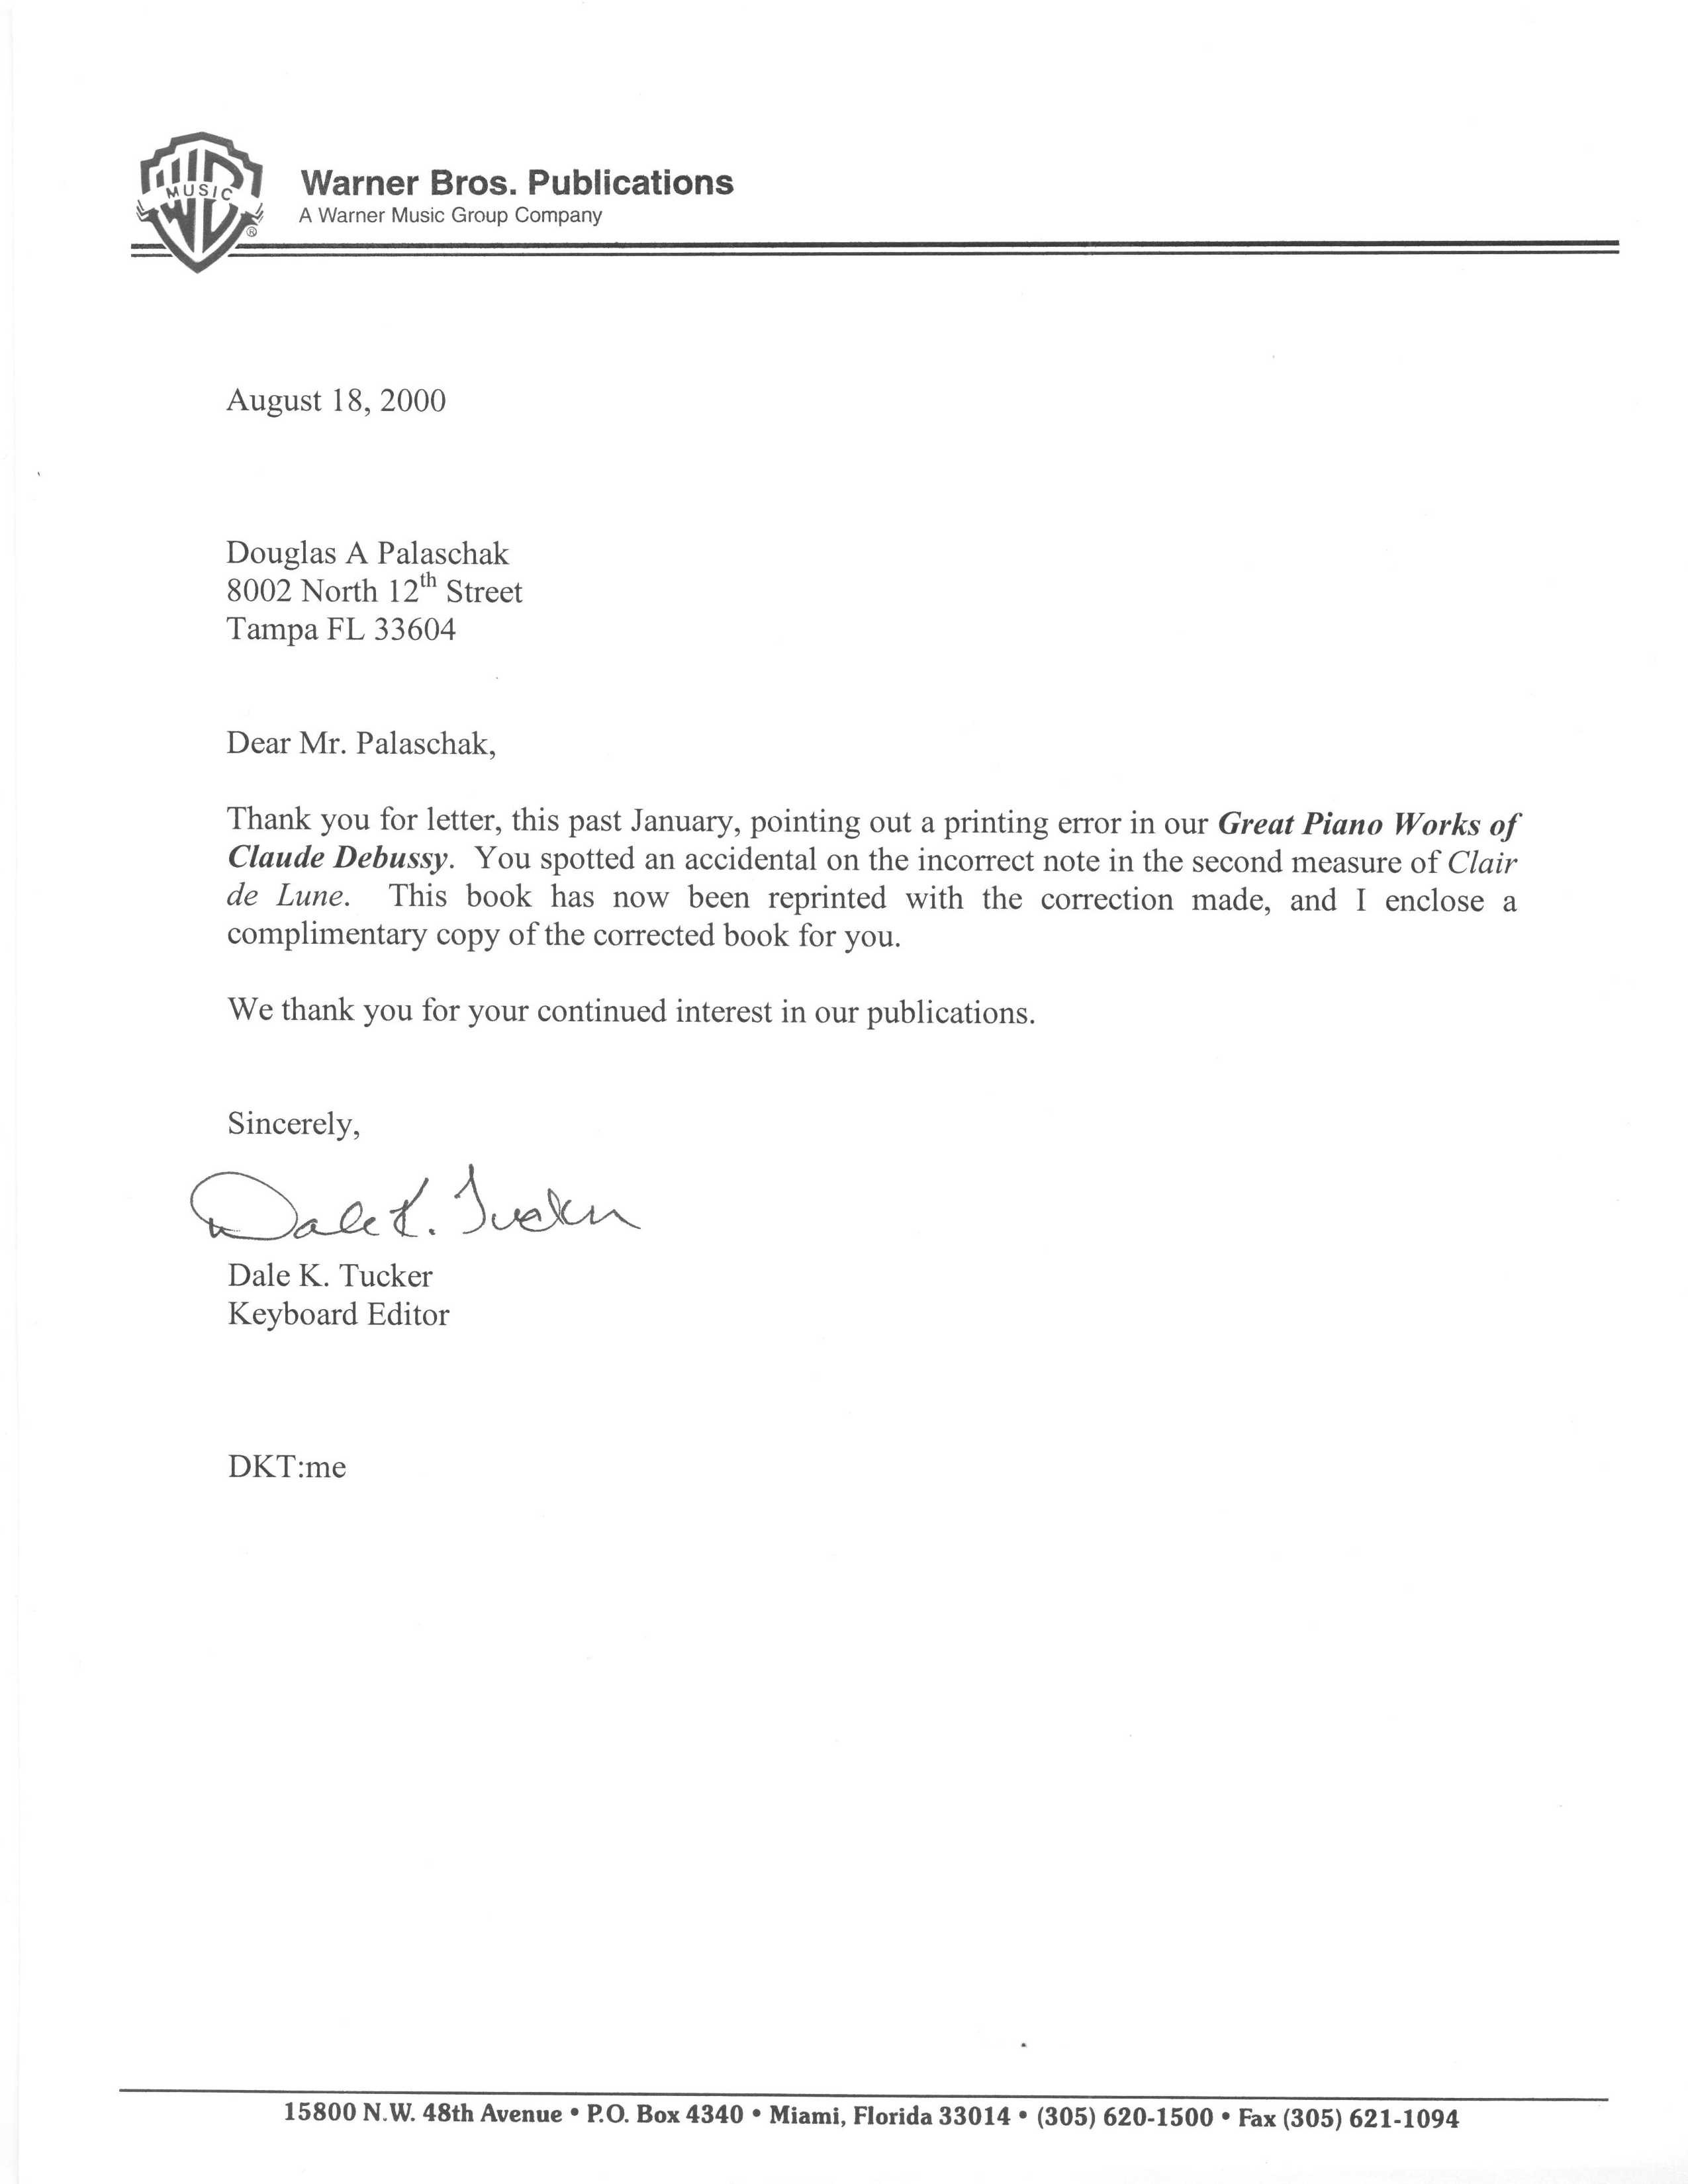 Notarized Letter Template Florida Collection Letter